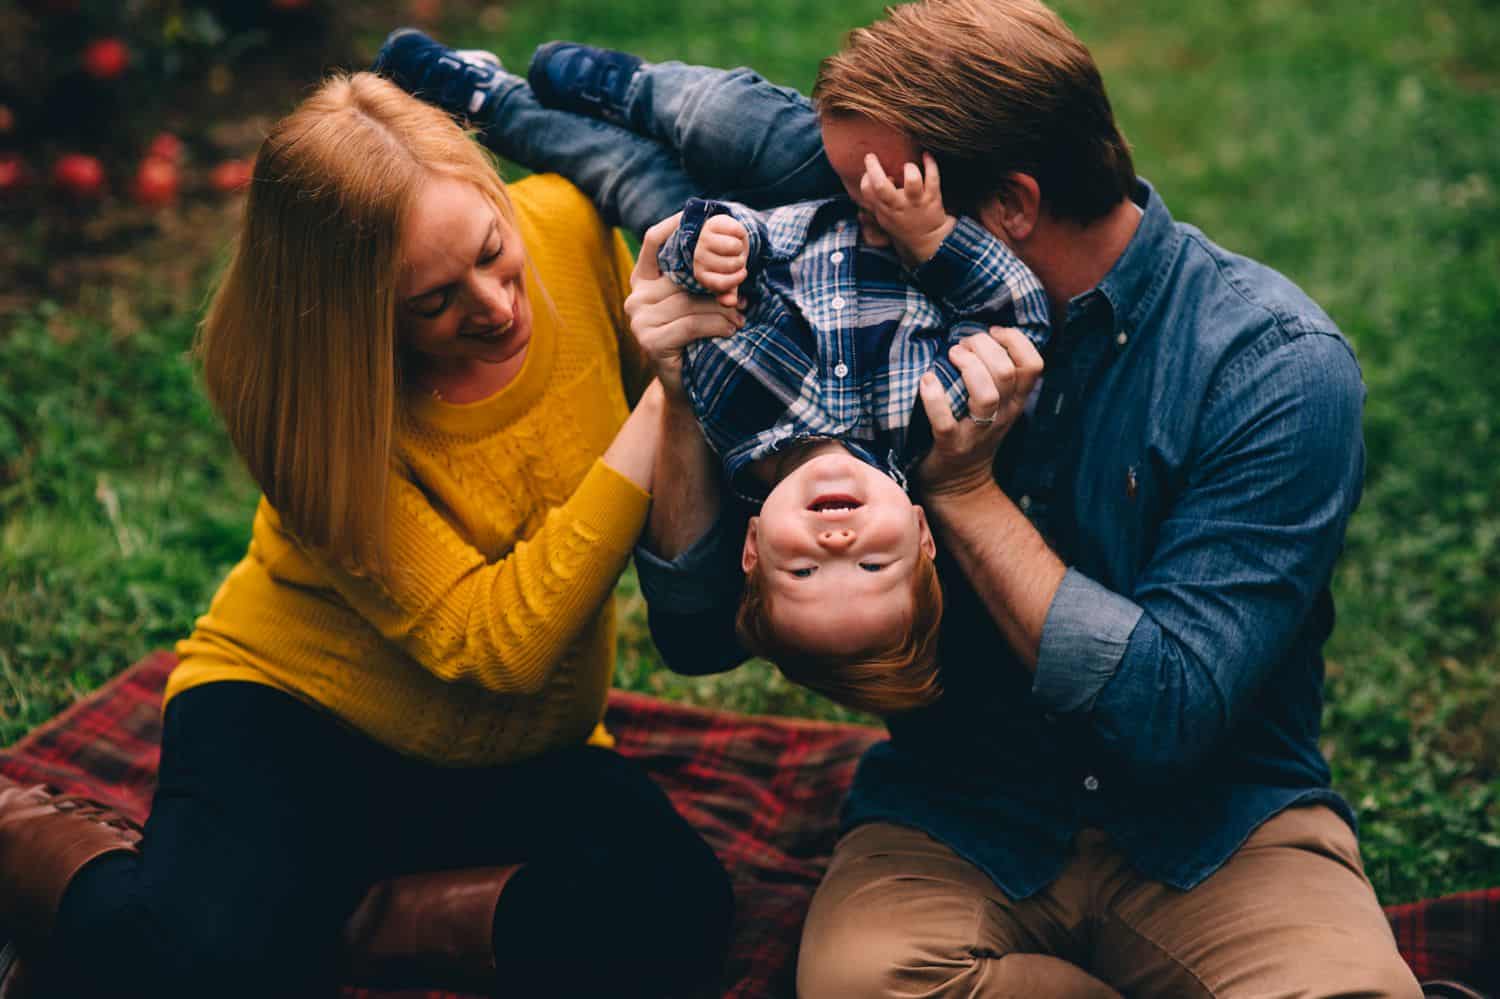 Two parents dressed in fall colors sit on a plaid picnic blanket. They are holding their toddler son upside down as he giggles.